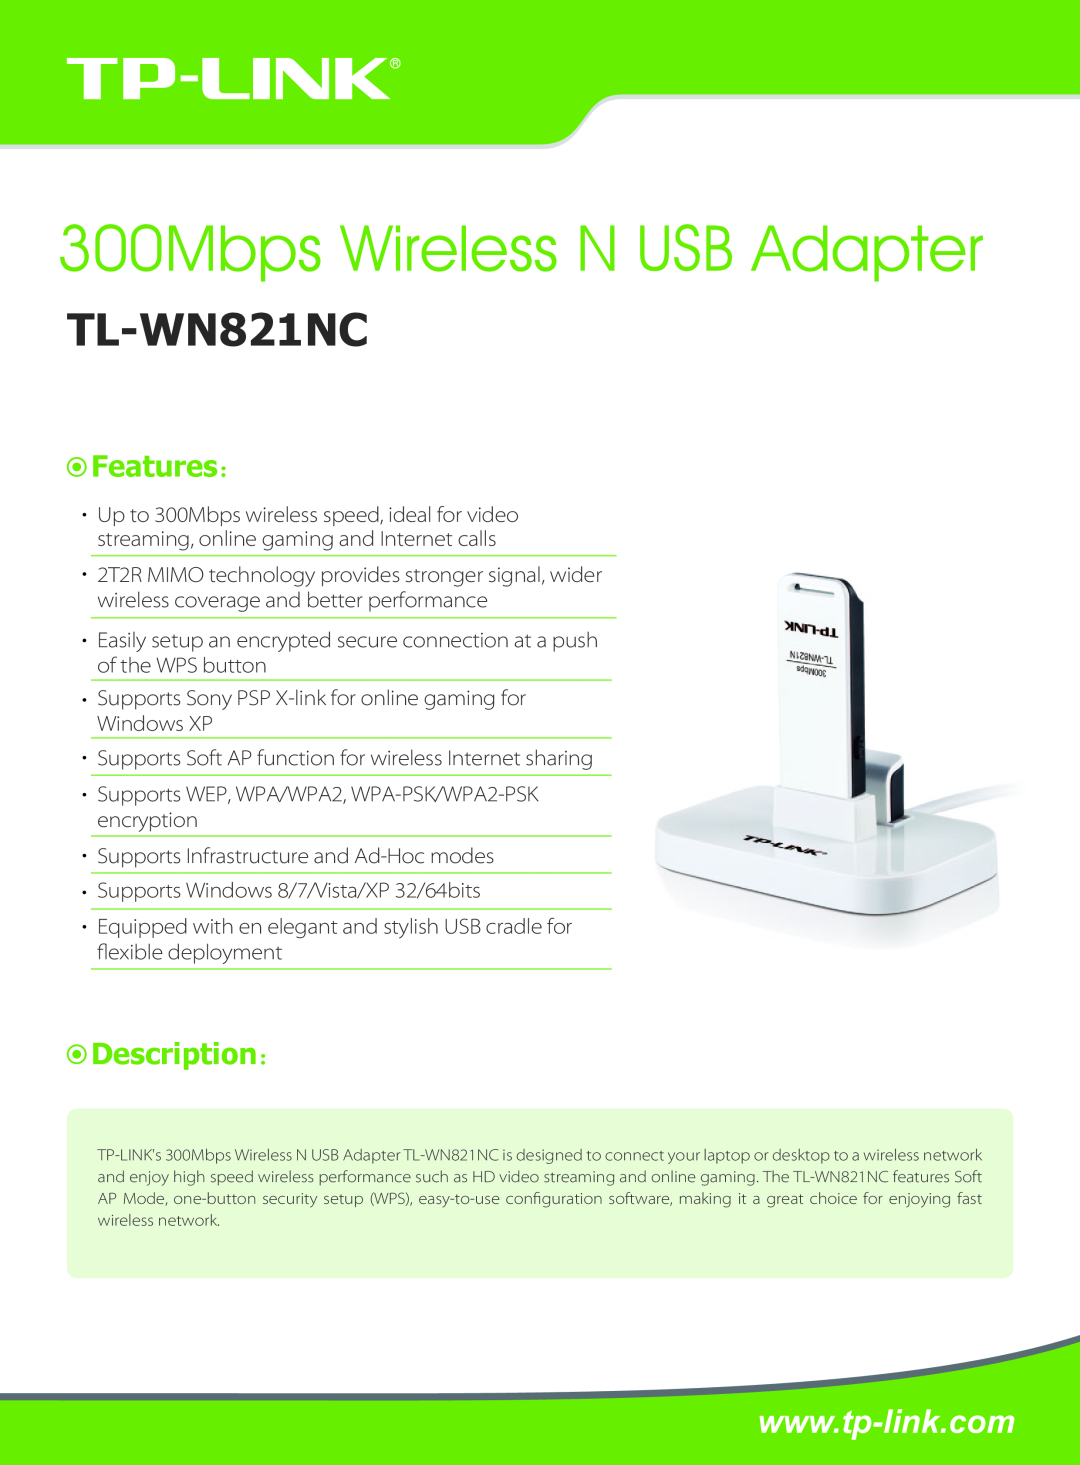 TP-Link TL-WN821NC manual Features：, Description：, 300Mbps Wireless N USB Adapter 